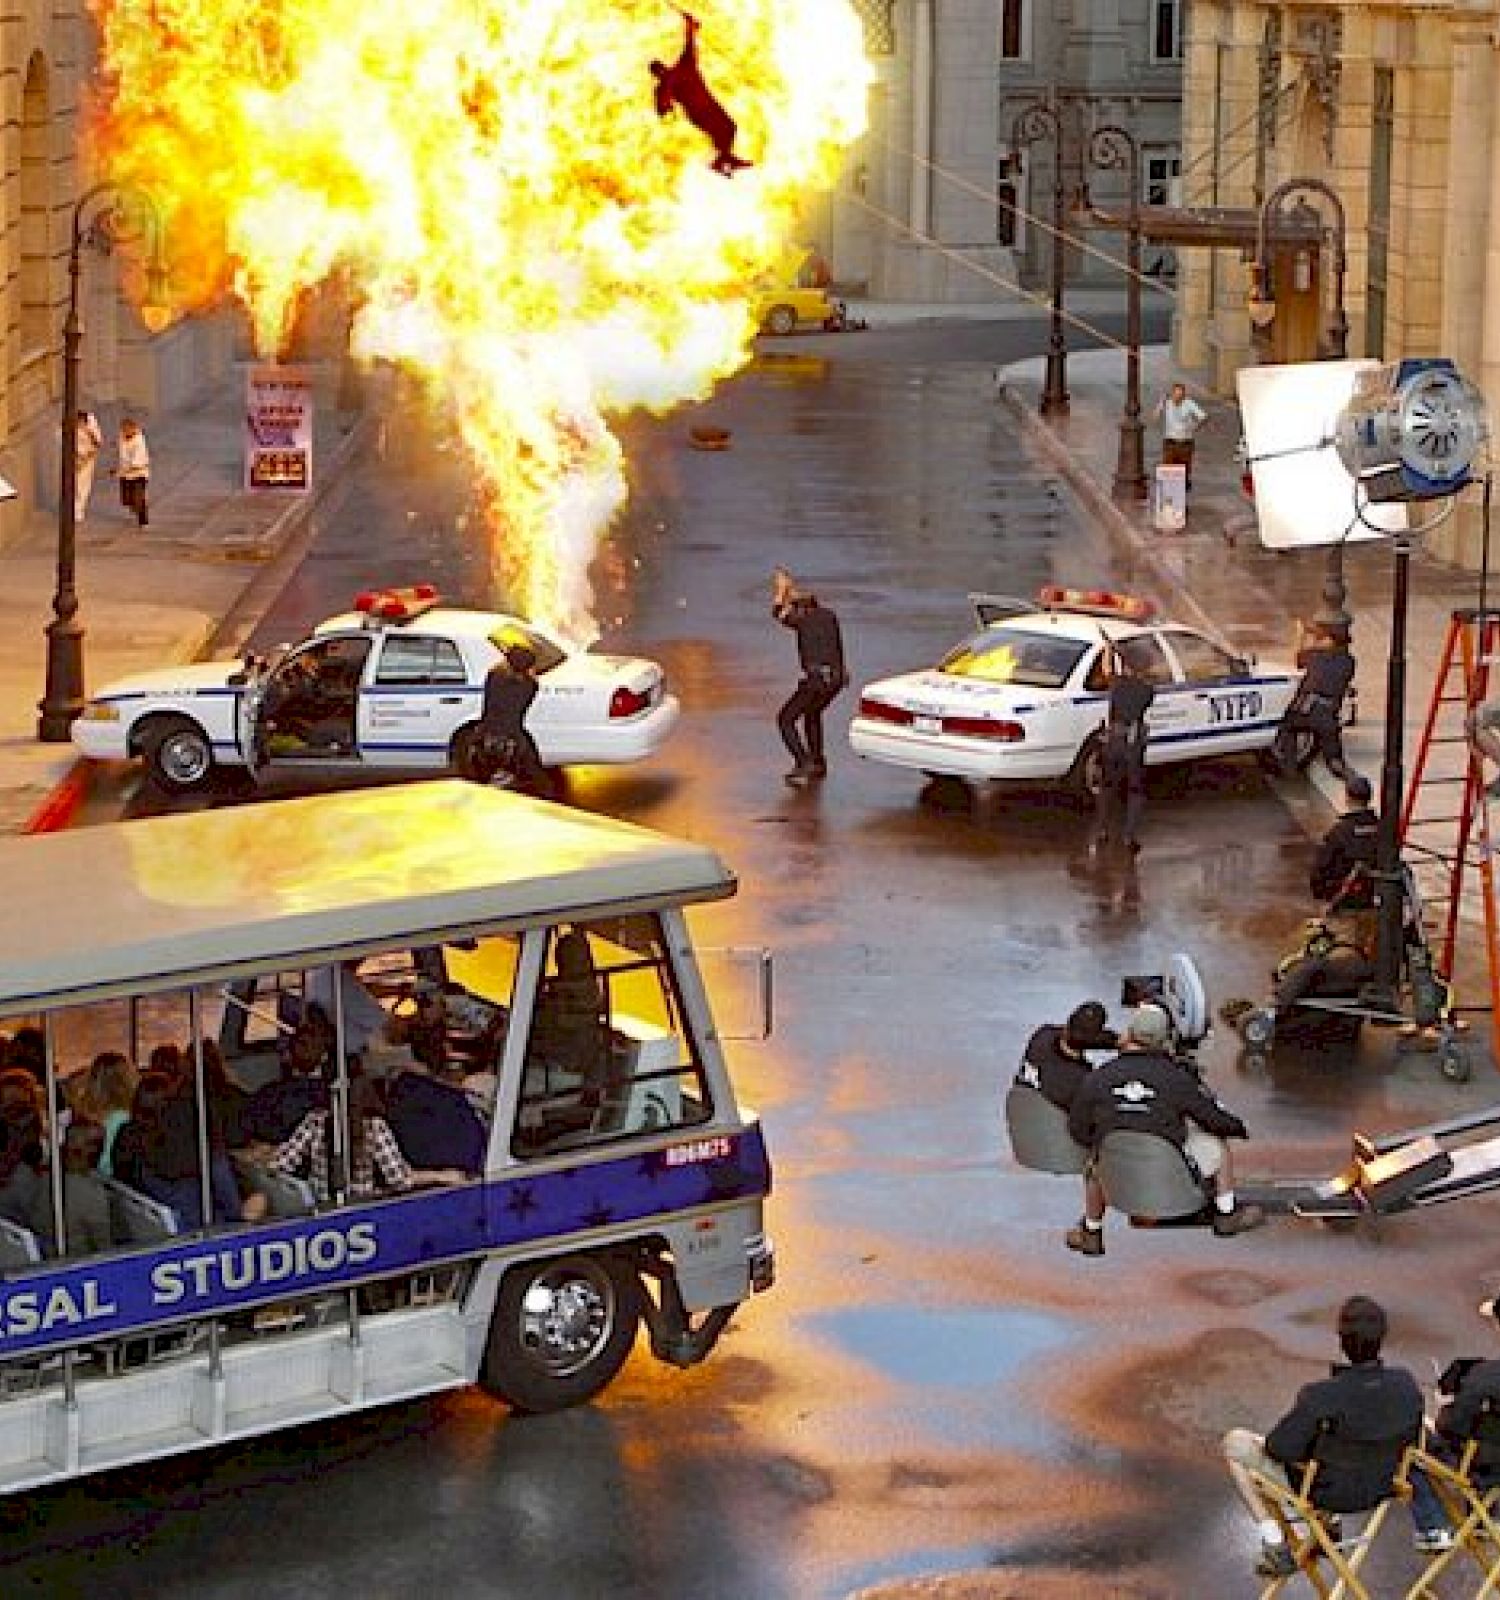 A film set featuring an explosion, police cars, and crew members filming a scene; a bus marked “Universal Studios” with onlookers is visible.